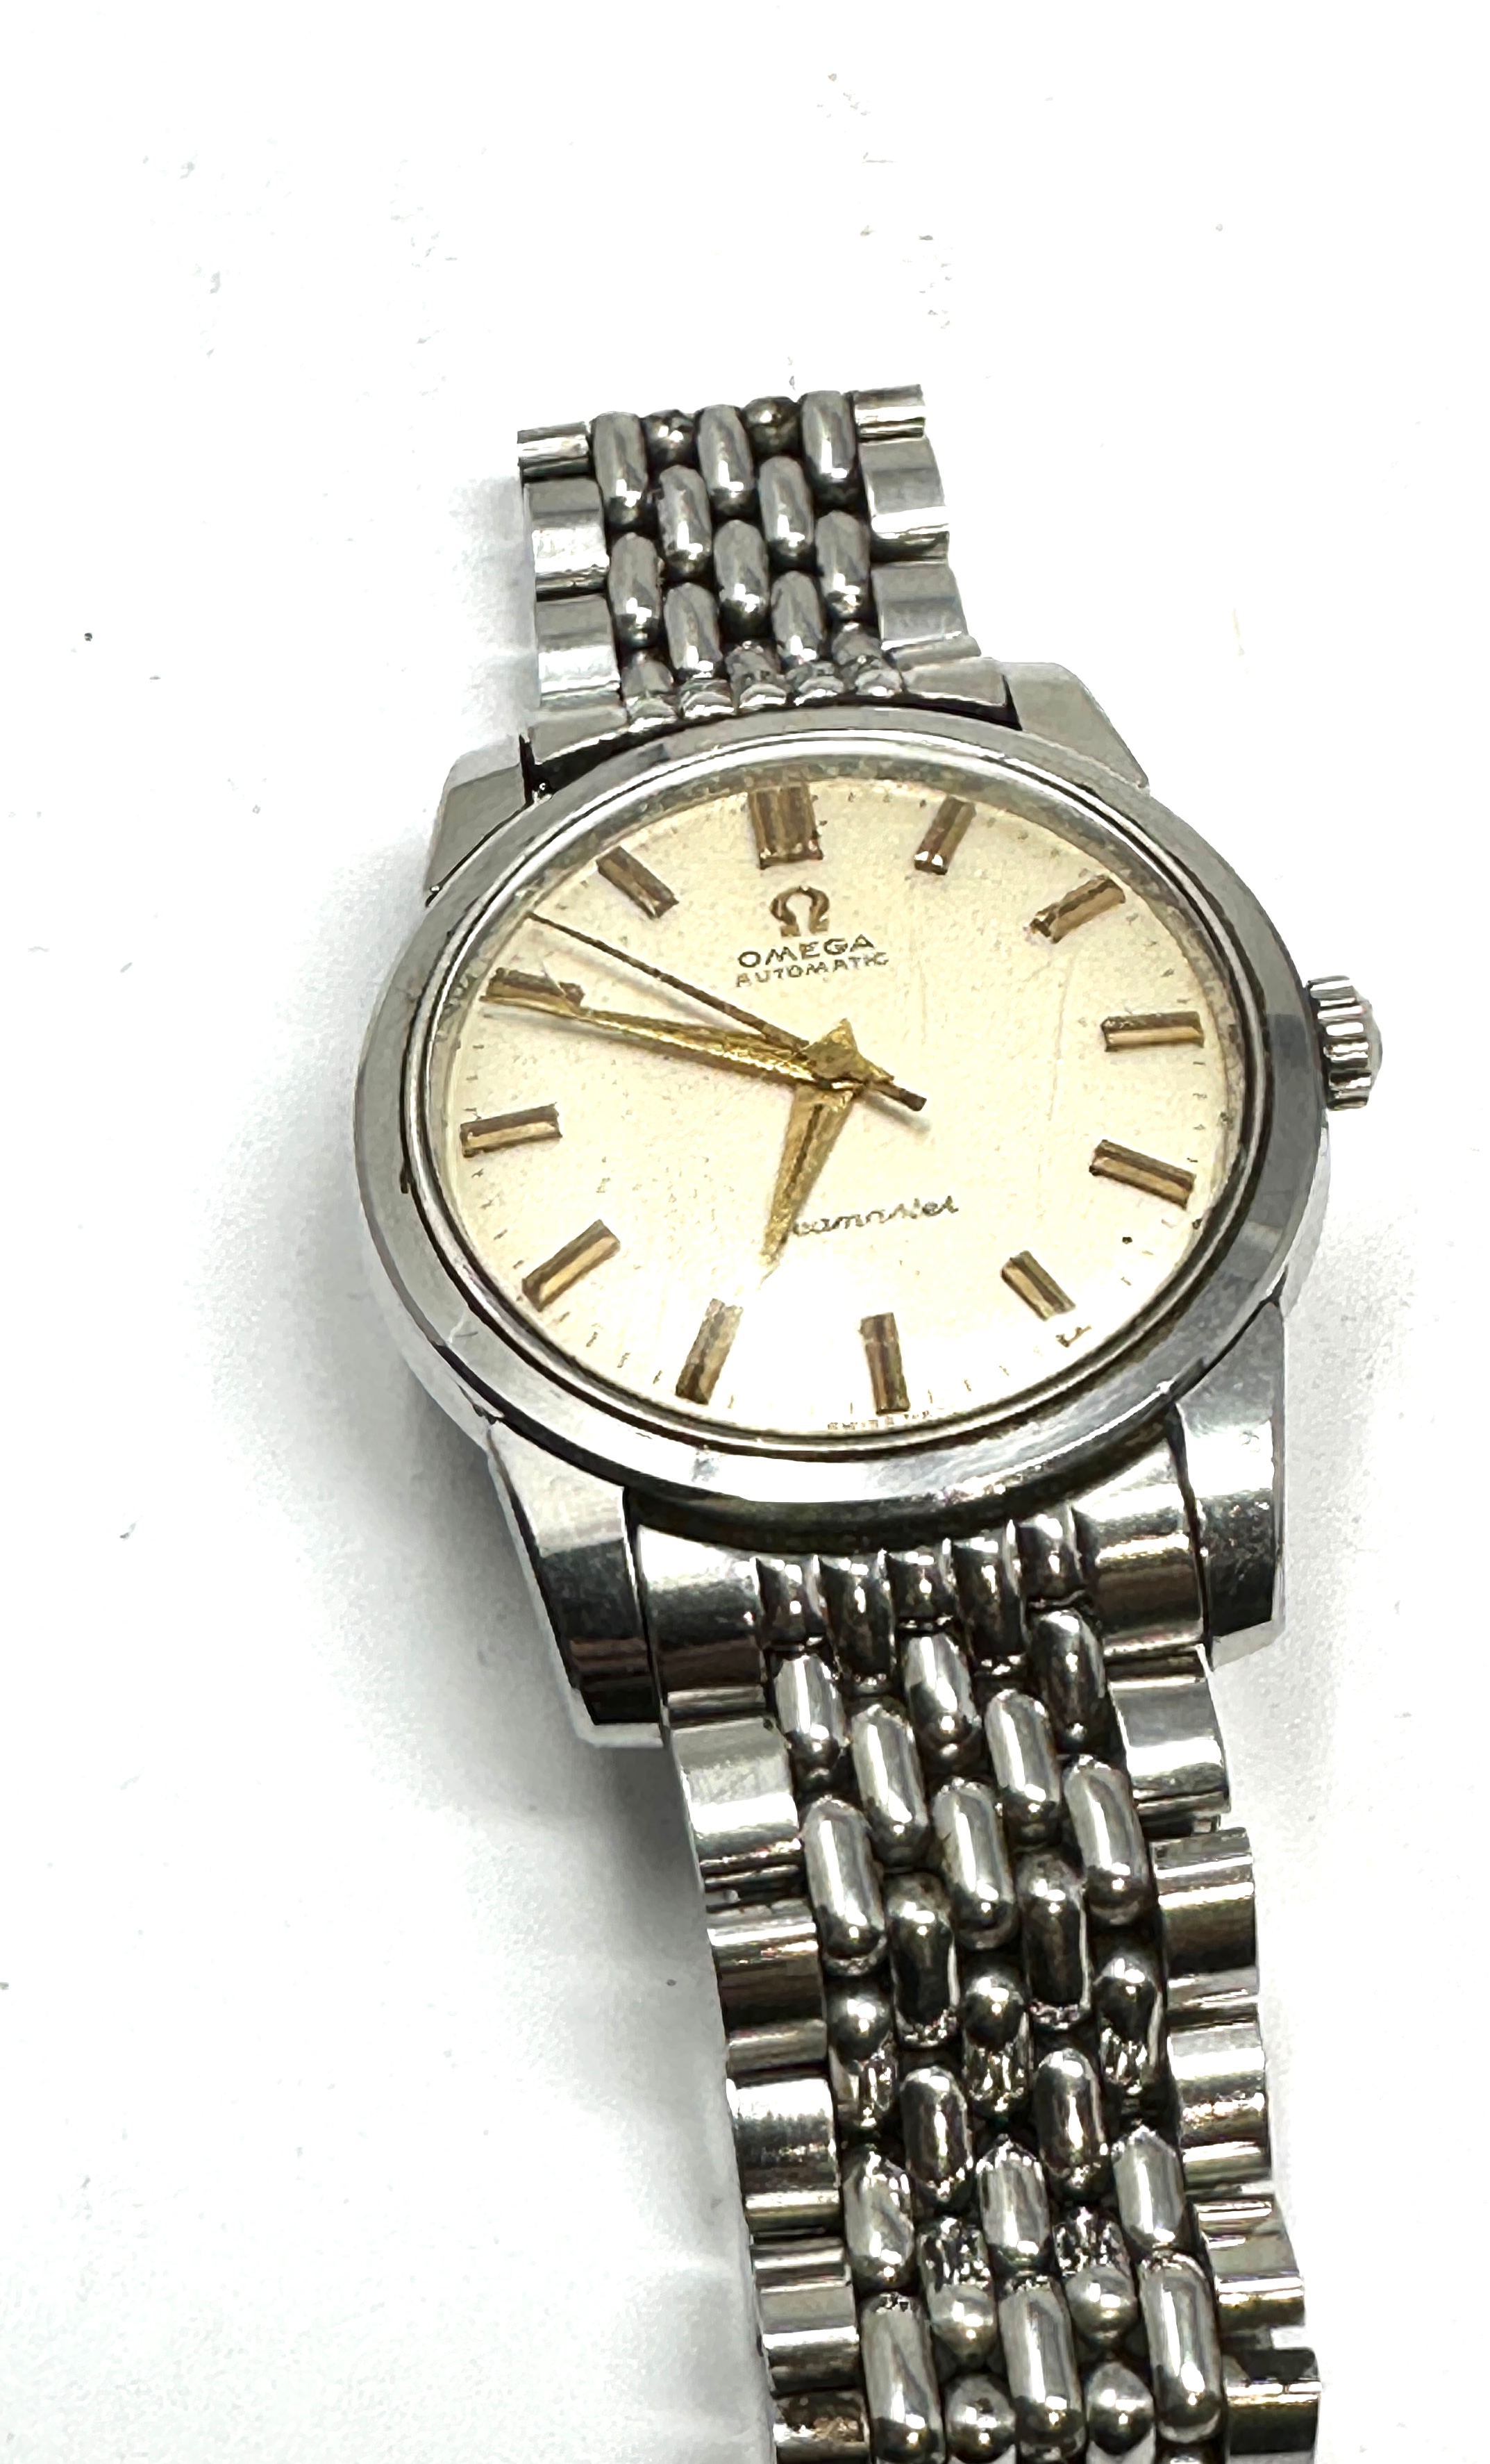 Vintage Gents steel Omega automatic seamaster wrist watch and strap the watch is ticking